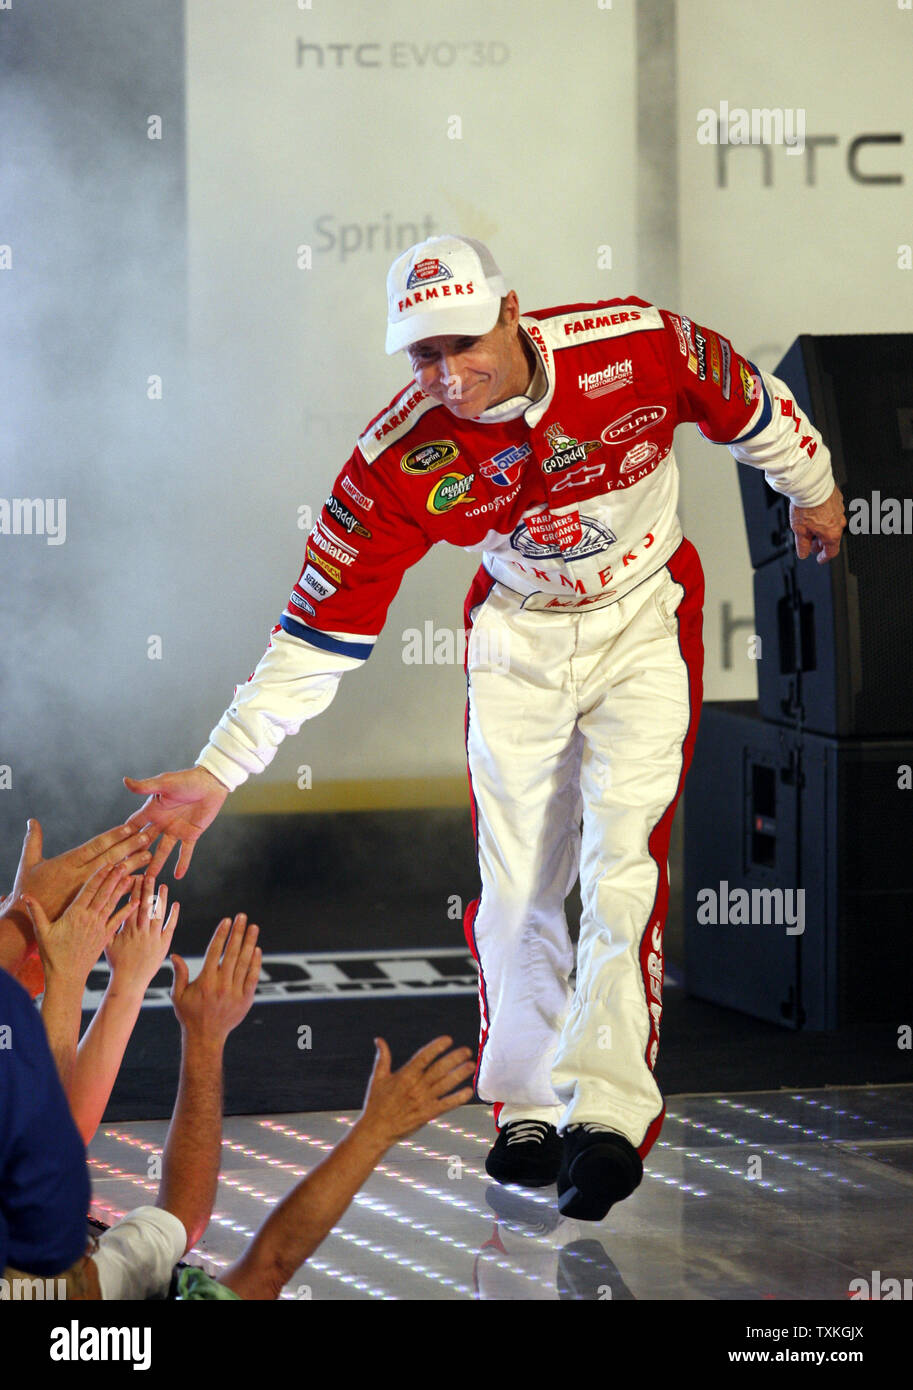 Mark Martin greets fans during driver introductions before the NASCAR Sprint Cup Series All-Star Race at the Charlotte Motor Speedway in Concord, North Carolina on May 21, 2010.   UPI/Nell Redmond . Stock Photo